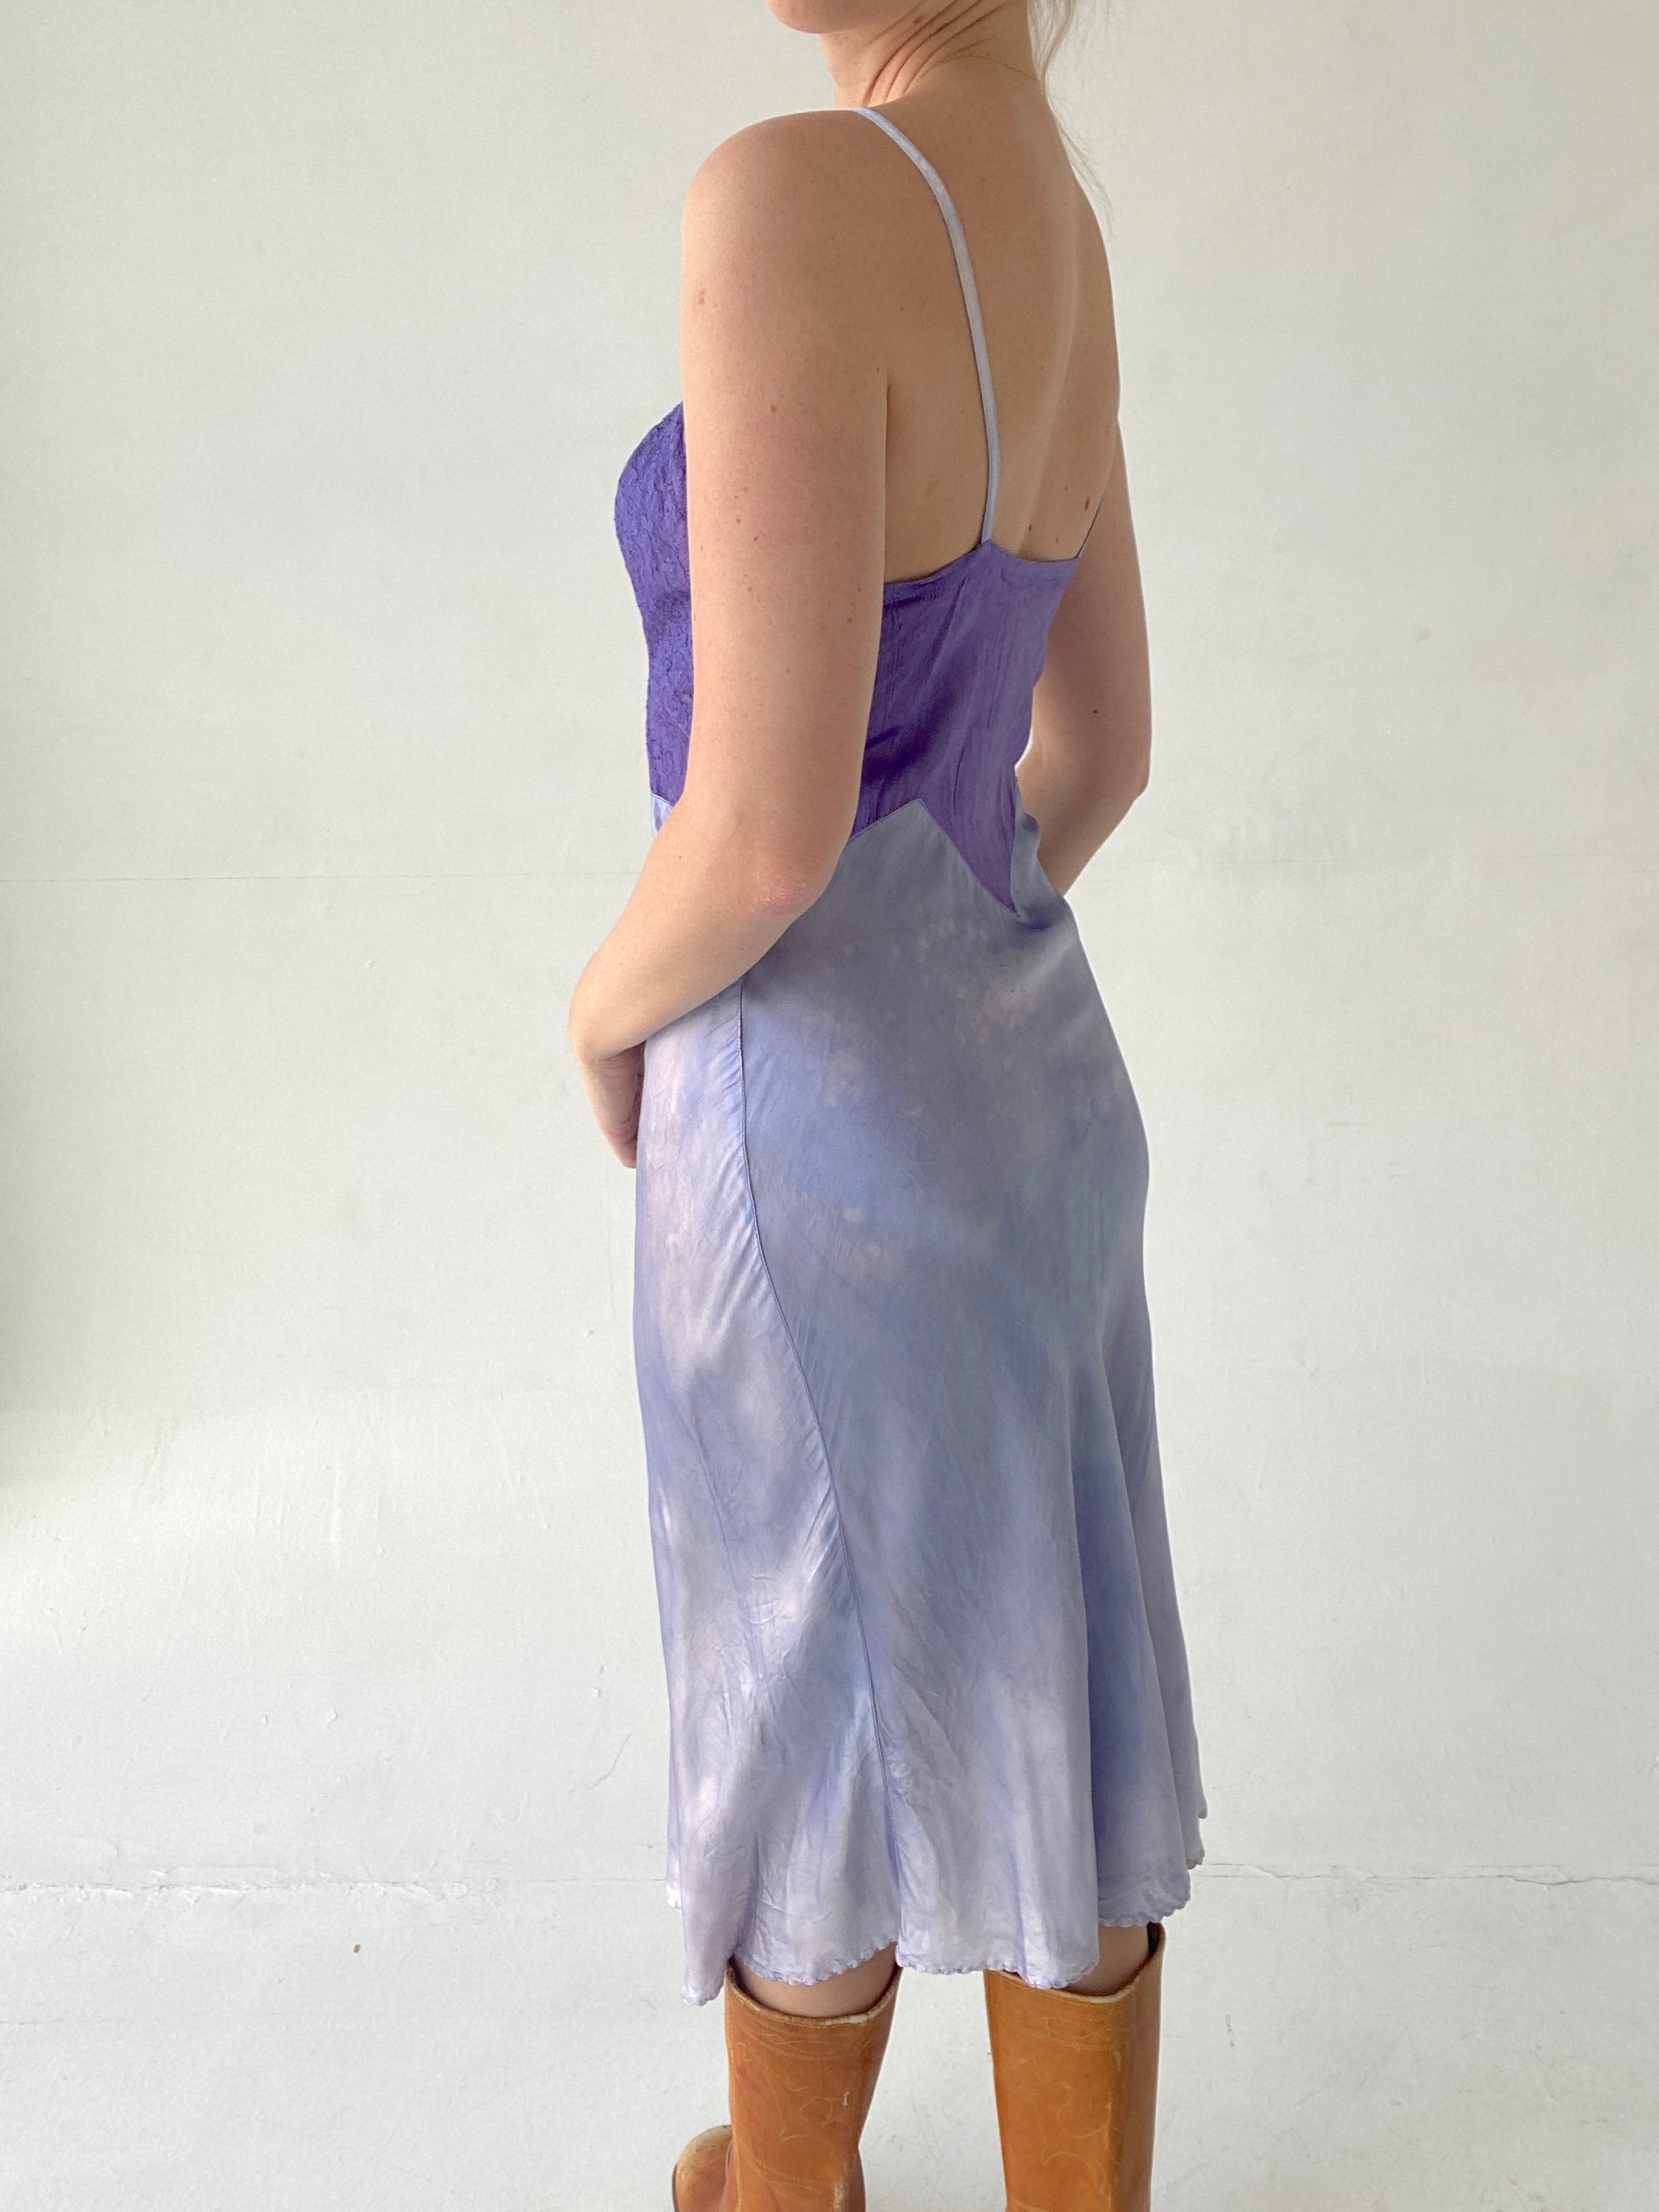 Hand Dyed Saie Blue Purple Slip with Lace Bodice